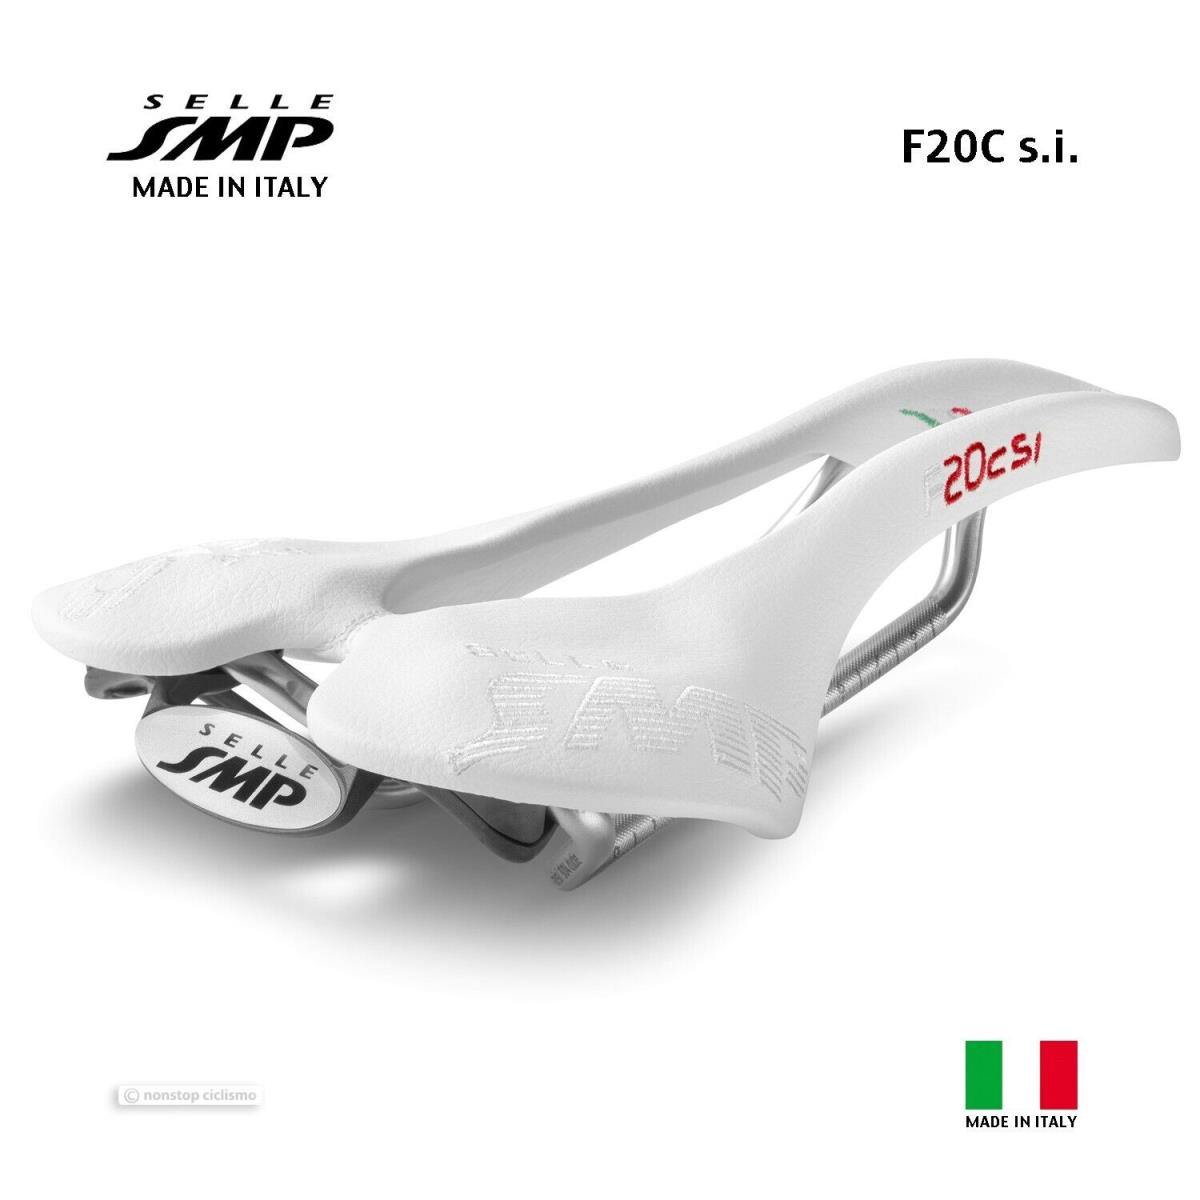 Selle Smp F20Csi Saddle : White - Made IN Italy